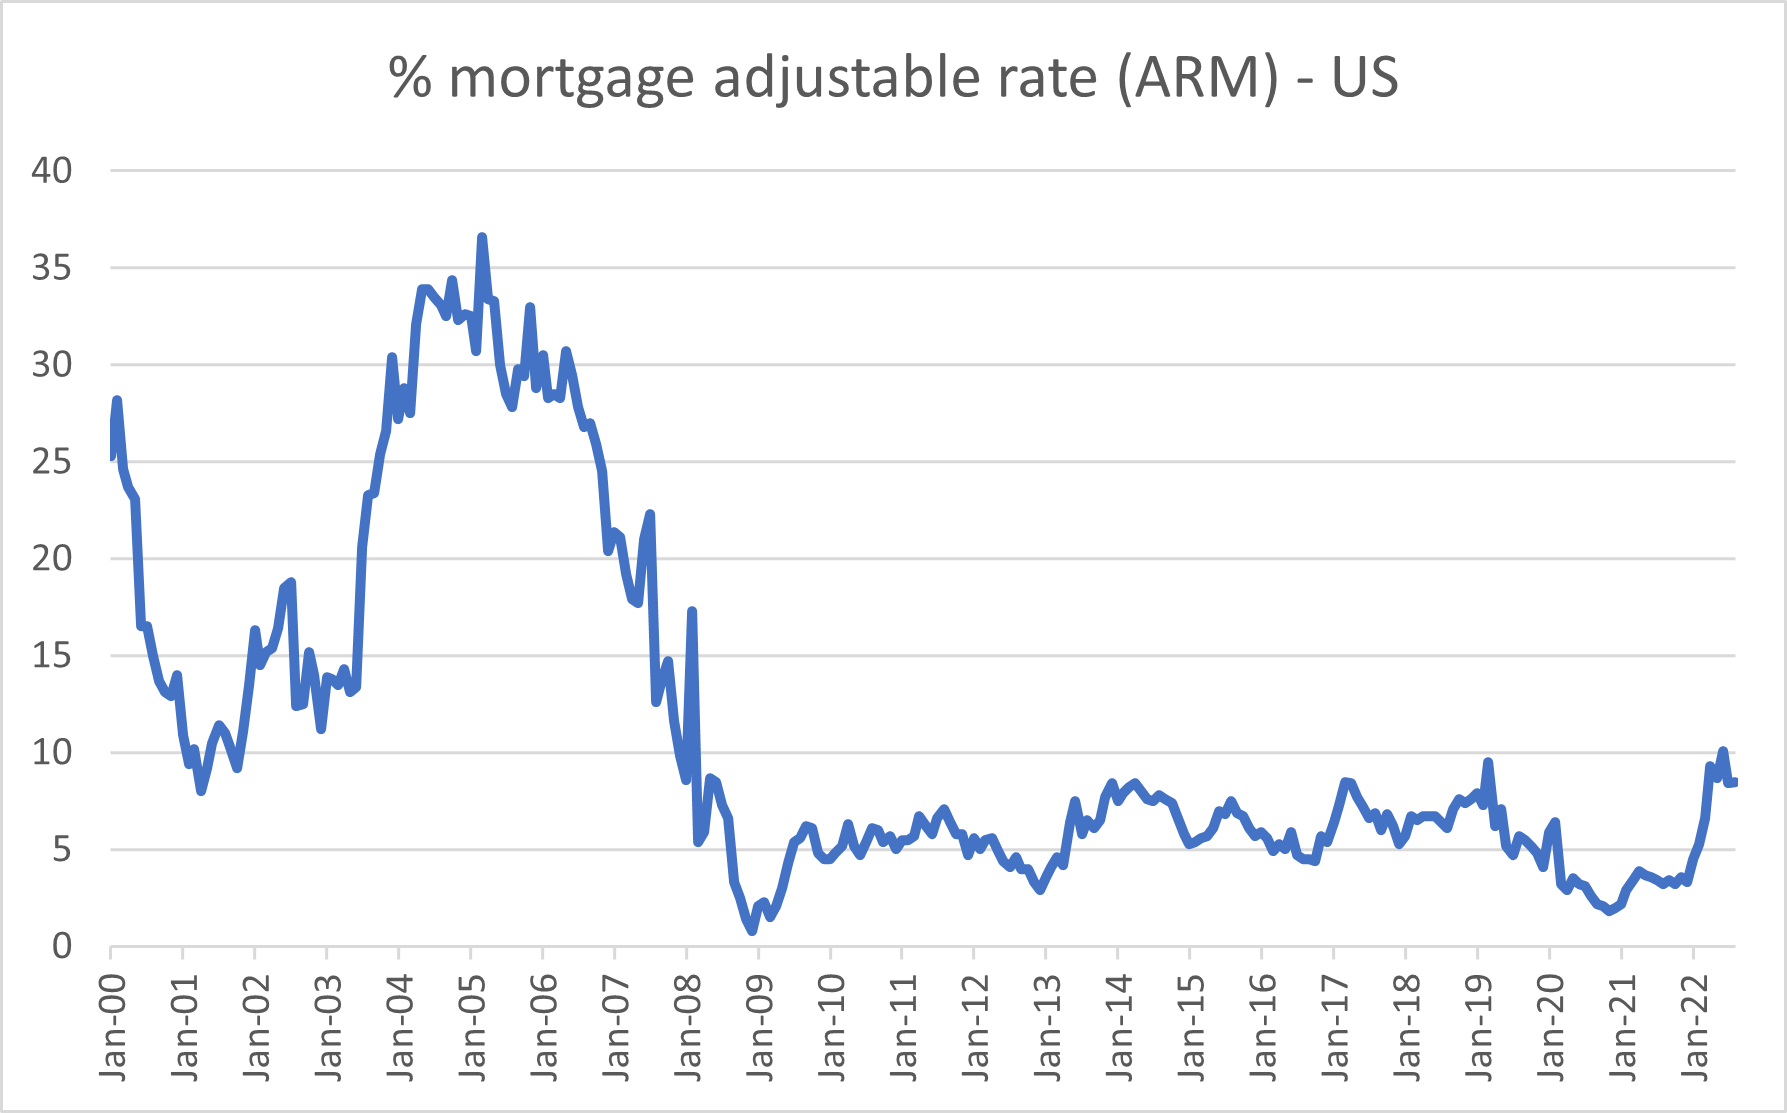 Source: US Mortgage Brokers Association 